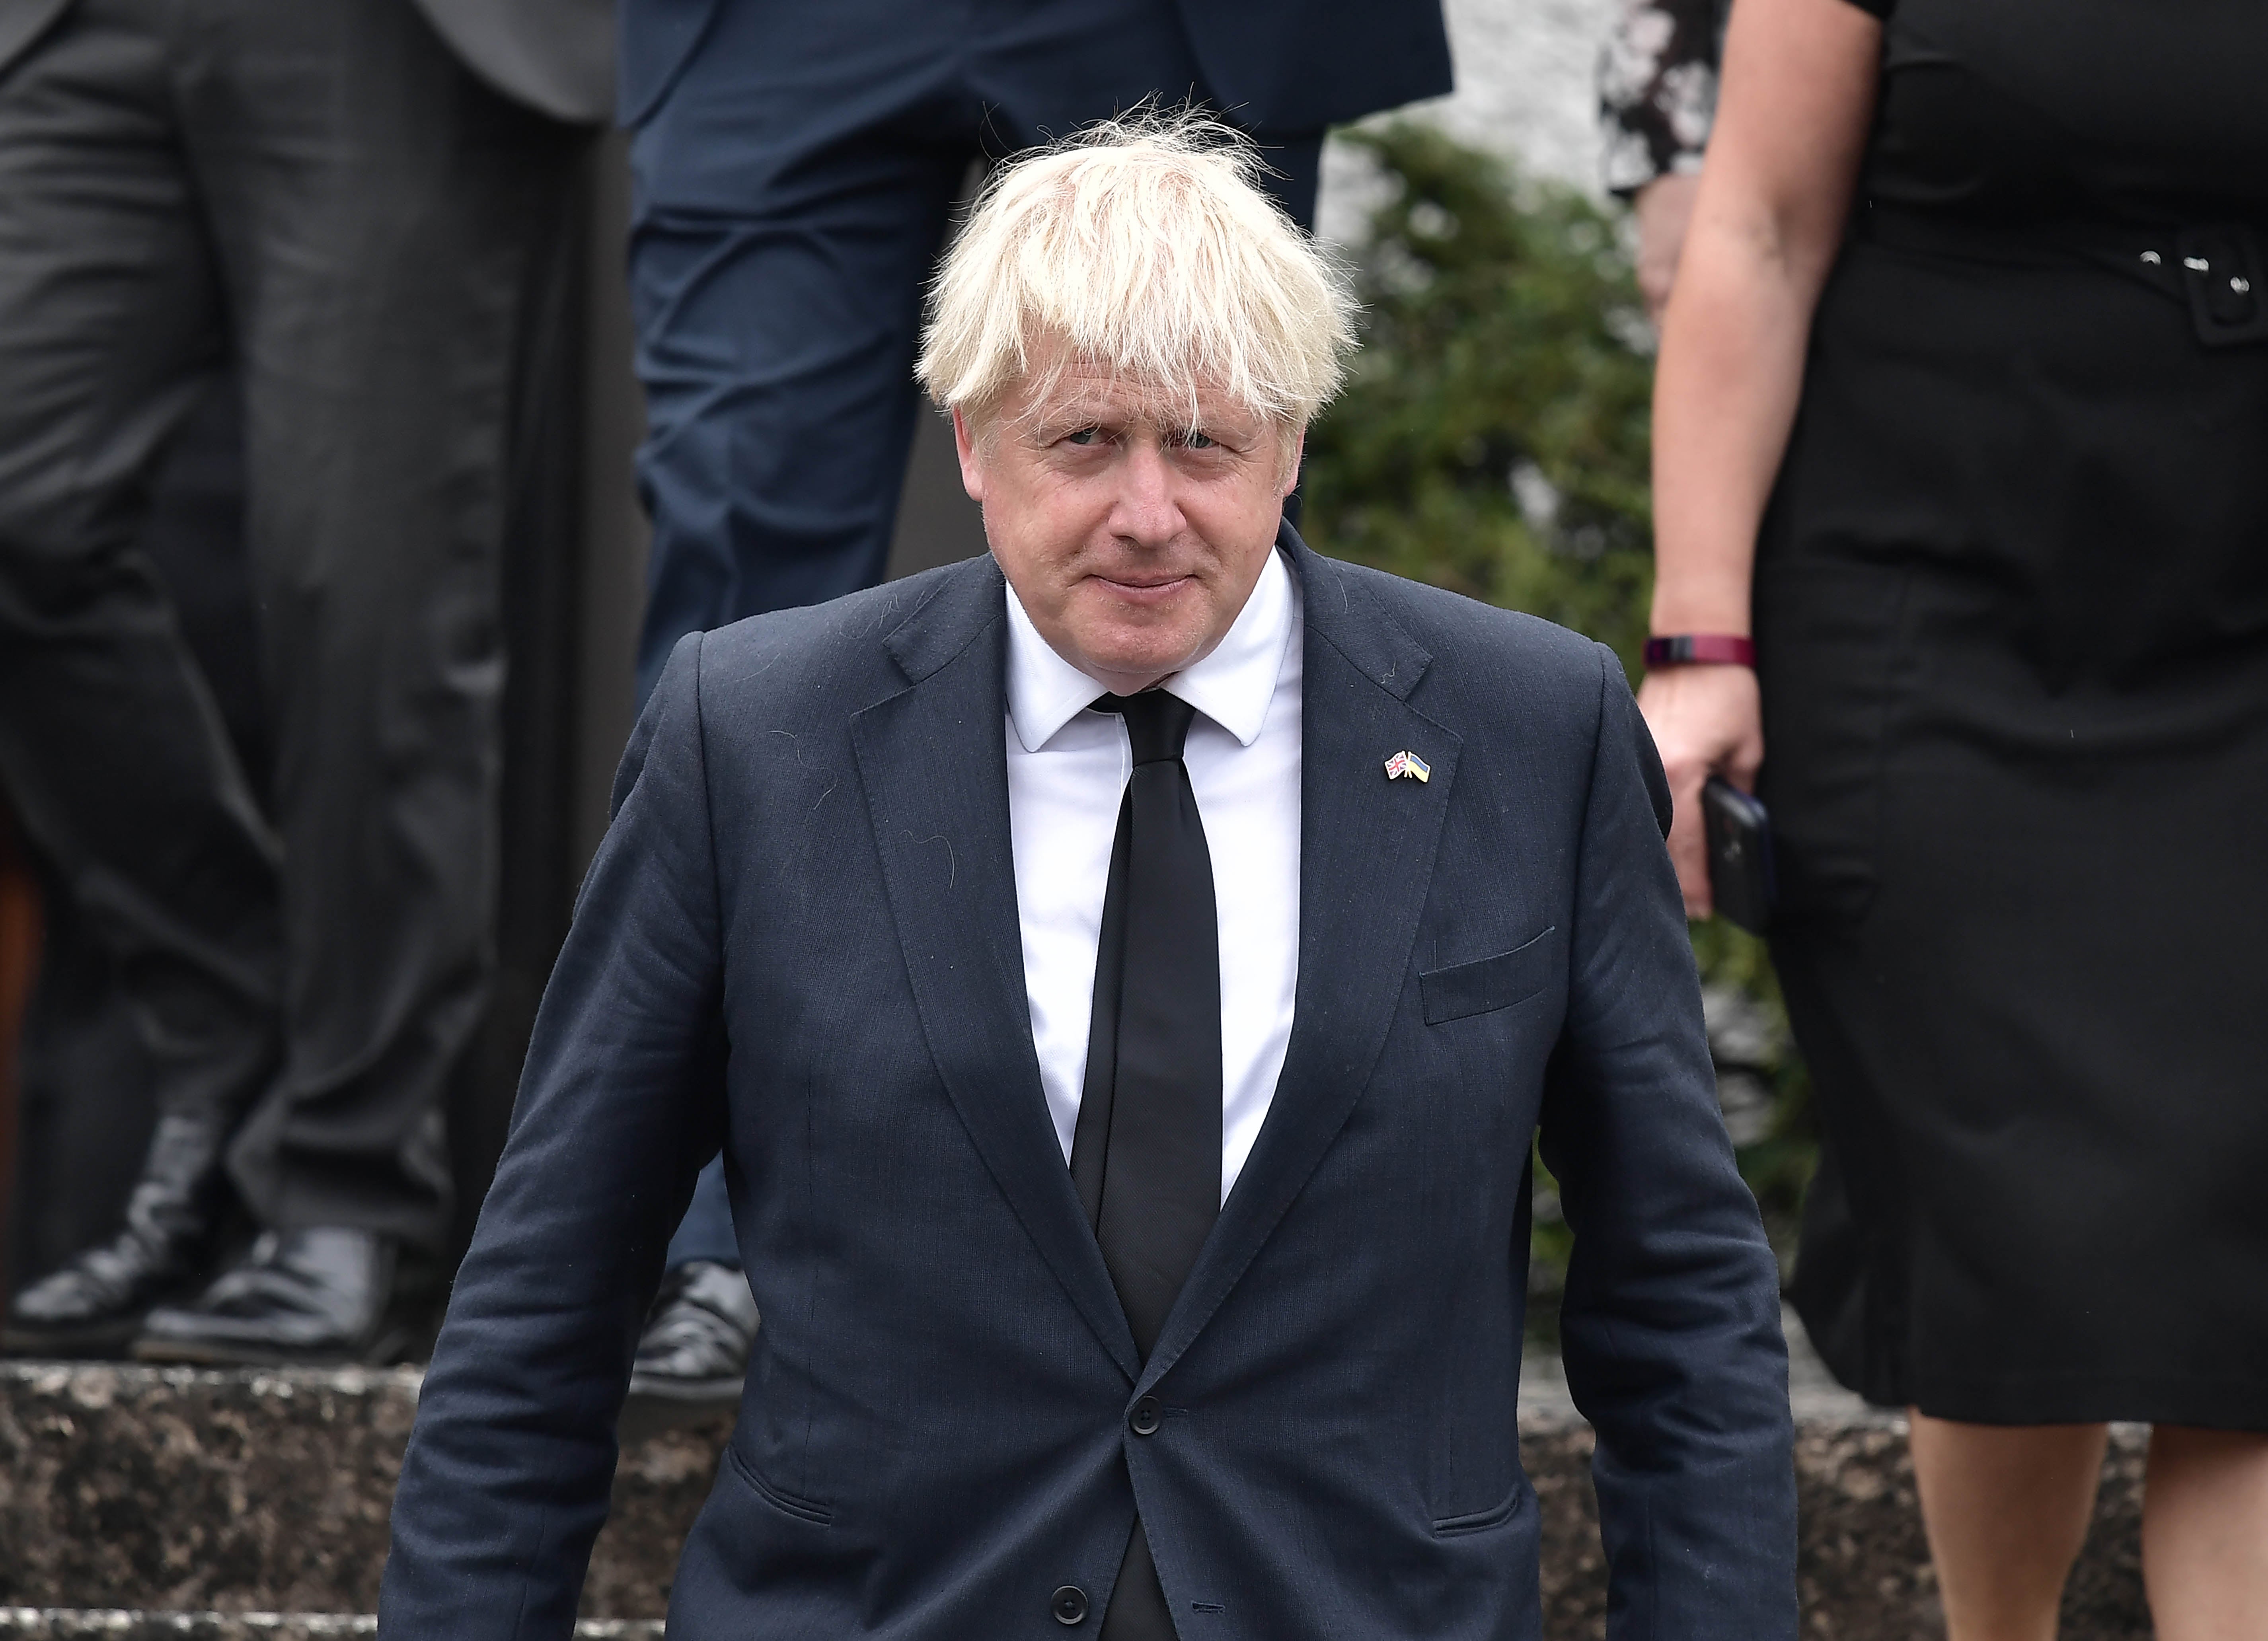 Boris Johnson has not been popular with the public for a long time now, and his supporters in both parliament and Fleet Street must reckon with that